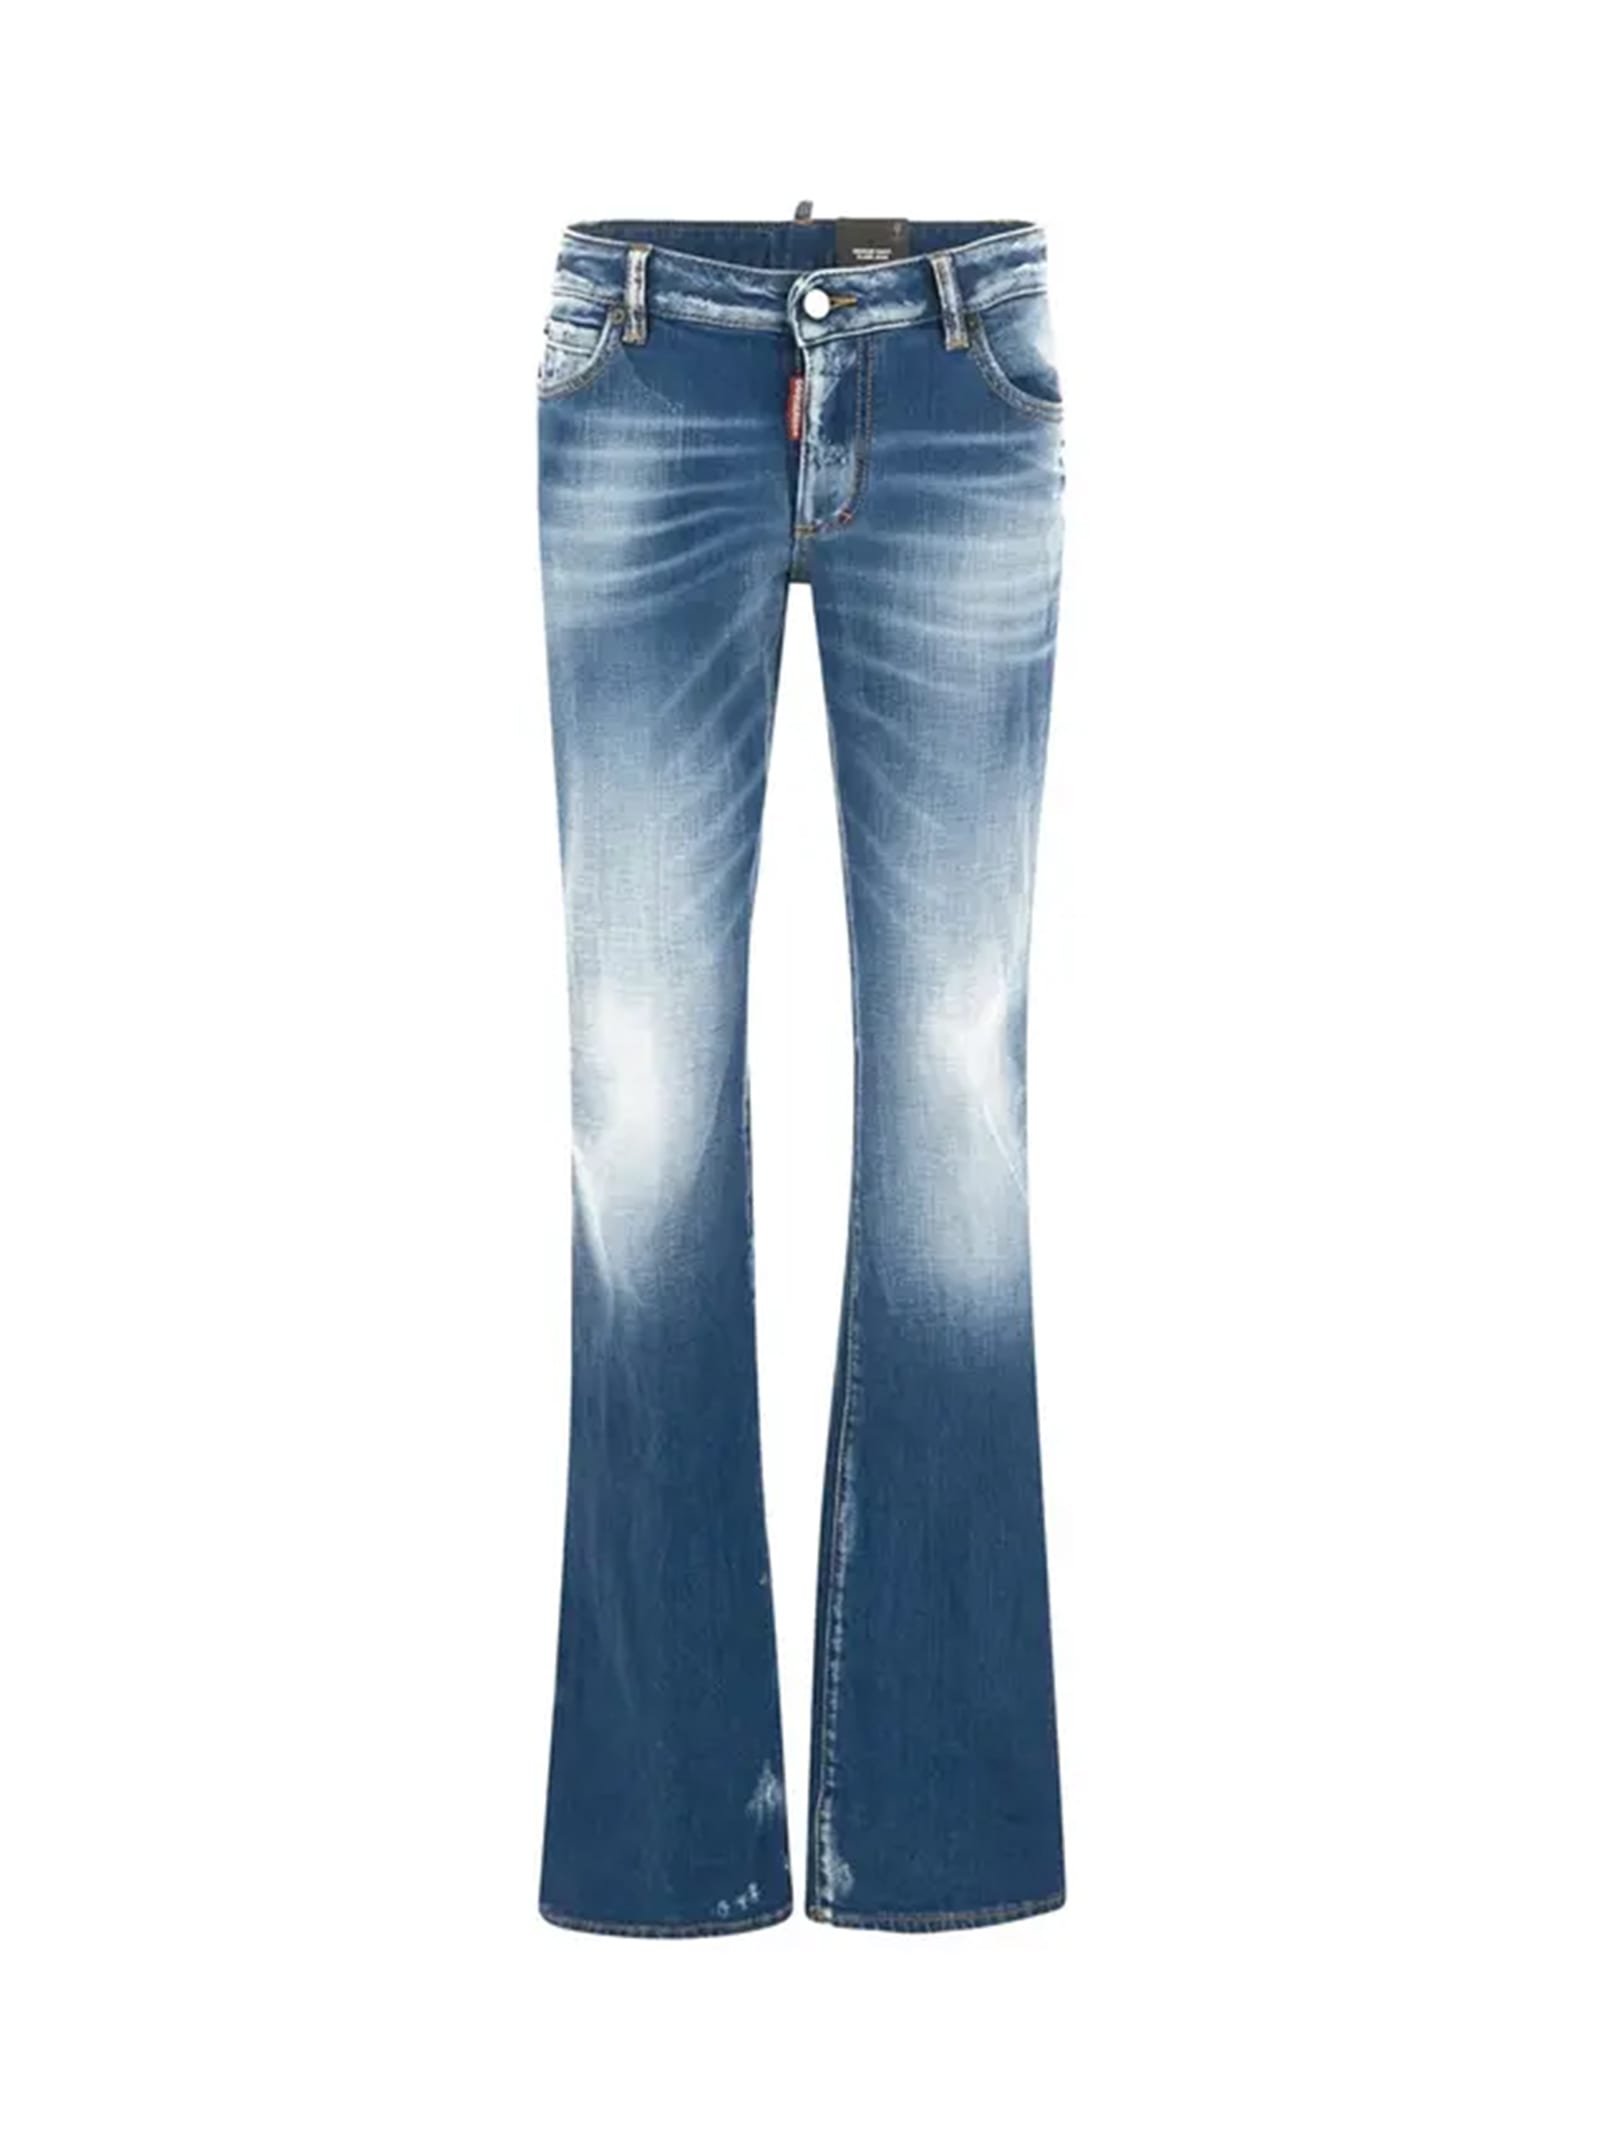 DSQUARED2 FLARED JEANS 5 POCKETS